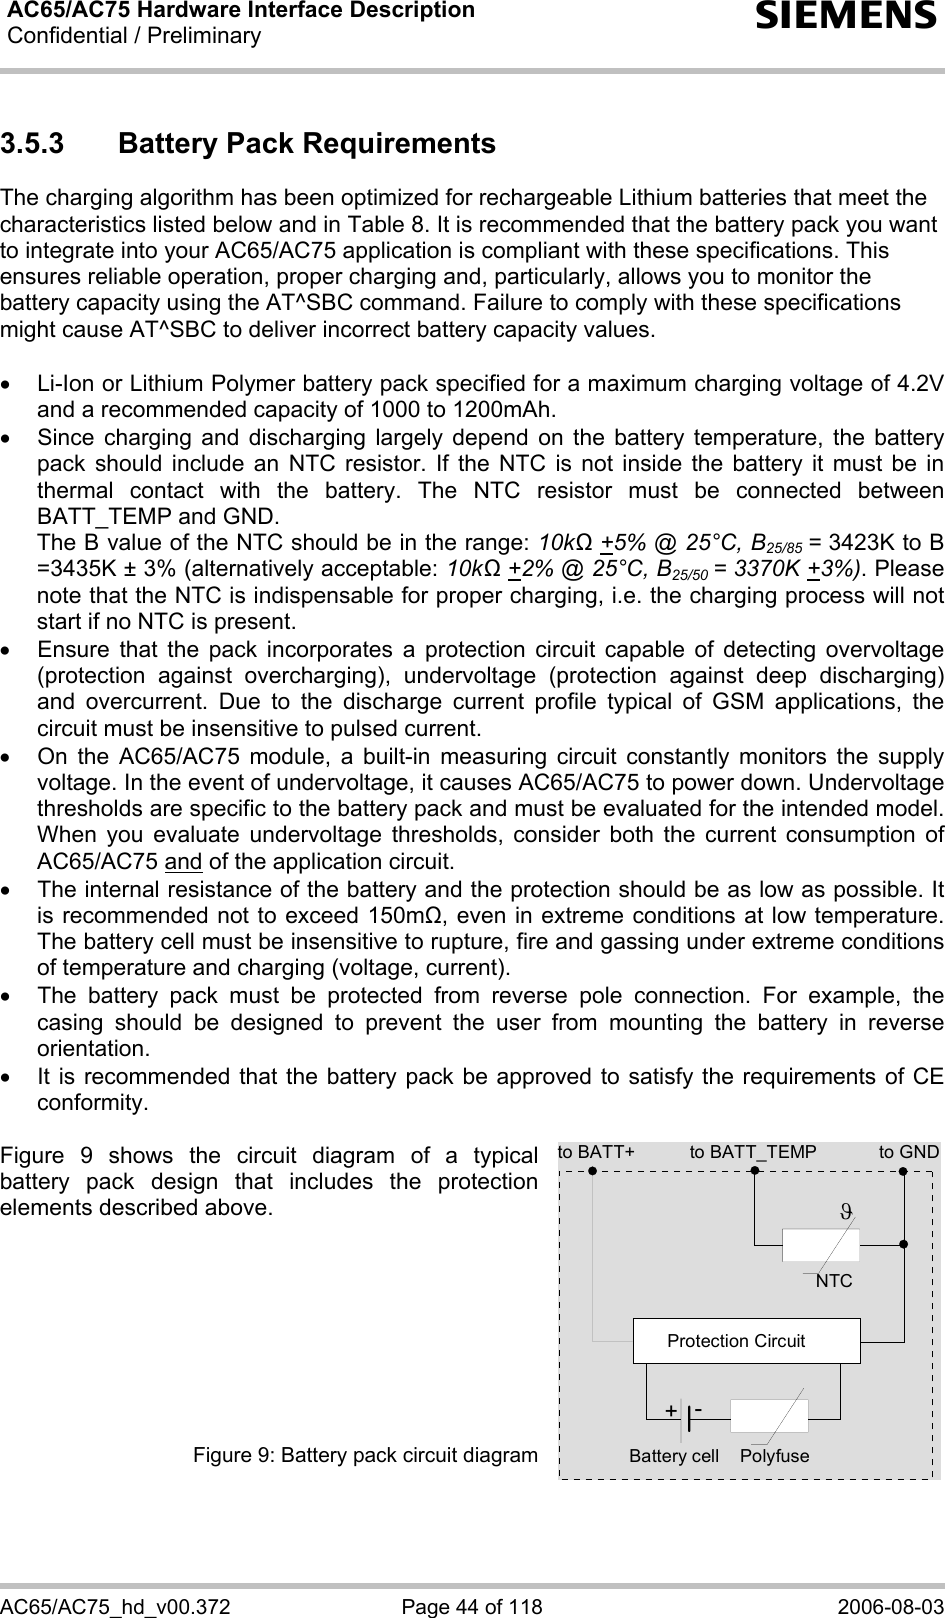 AC65/AC75 Hardware Interface Description Confidential / Preliminary  s AC65/AC75_hd_v00.372  Page 44 of 118  2006-08-03 3.5.3  Battery Pack Requirements The charging algorithm has been optimized for rechargeable Lithium batteries that meet the characteristics listed below and in Table 8. It is recommended that the battery pack you want to integrate into your AC65/AC75 application is compliant with these specifications. This ensures reliable operation, proper charging and, particularly, allows you to monitor the battery capacity using the AT^SBC command. Failure to comply with these specifications might cause AT^SBC to deliver incorrect battery capacity values.   •  Li-Ion or Lithium Polymer battery pack specified for a maximum charging voltage of 4.2V and a recommended capacity of 1000 to 1200mAh.  •  Since charging and discharging largely depend on the battery temperature, the battery pack should include an NTC resistor. If the NTC is not inside the battery it must be in thermal contact with the battery. The NTC resistor must be connected between BATT_TEMP and GND.  The B value of the NTC should be in the range: 10kΩ +5% @ 25°C, B25/85 = 3423K to B =3435K ± 3% (alternatively acceptable: 10kΩ +2% @ 25°C, B25/50 = 3370K +3%). Please note that the NTC is indispensable for proper charging, i.e. the charging process will not start if no NTC is present. •  Ensure that the pack incorporates a protection circuit capable of detecting overvoltage (protection against overcharging), undervoltage (protection against deep discharging) and overcurrent. Due to the discharge current profile typical of GSM applications, the circuit must be insensitive to pulsed current. •  On the AC65/AC75 module, a built-in measuring circuit constantly monitors the supply voltage. In the event of undervoltage, it causes AC65/AC75 to power down. Undervoltage thresholds are specific to the battery pack and must be evaluated for the intended model. When you evaluate undervoltage thresholds, consider both the current consumption of AC65/AC75 and of the application circuit.  •  The internal resistance of the battery and the protection should be as low as possible. It is recommended not to exceed 150m, even in extreme conditions at low temperature. The battery cell must be insensitive to rupture, fire and gassing under extreme conditions of temperature and charging (voltage, current). •  The battery pack must be protected from reverse pole connection. For example, the casing should be designed to prevent the user from mounting the battery in reverse orientation. •  It is recommended that the battery pack be approved to satisfy the requirements of CE conformity.  Figure 9 shows the circuit diagram of a typical battery pack design that includes the protection elements described above.          Figure 9: Battery pack circuit diagram  to BATT_TEMP to GNDNTCPolyfuseϑProtection Circuit+-Battery cellto BATT+